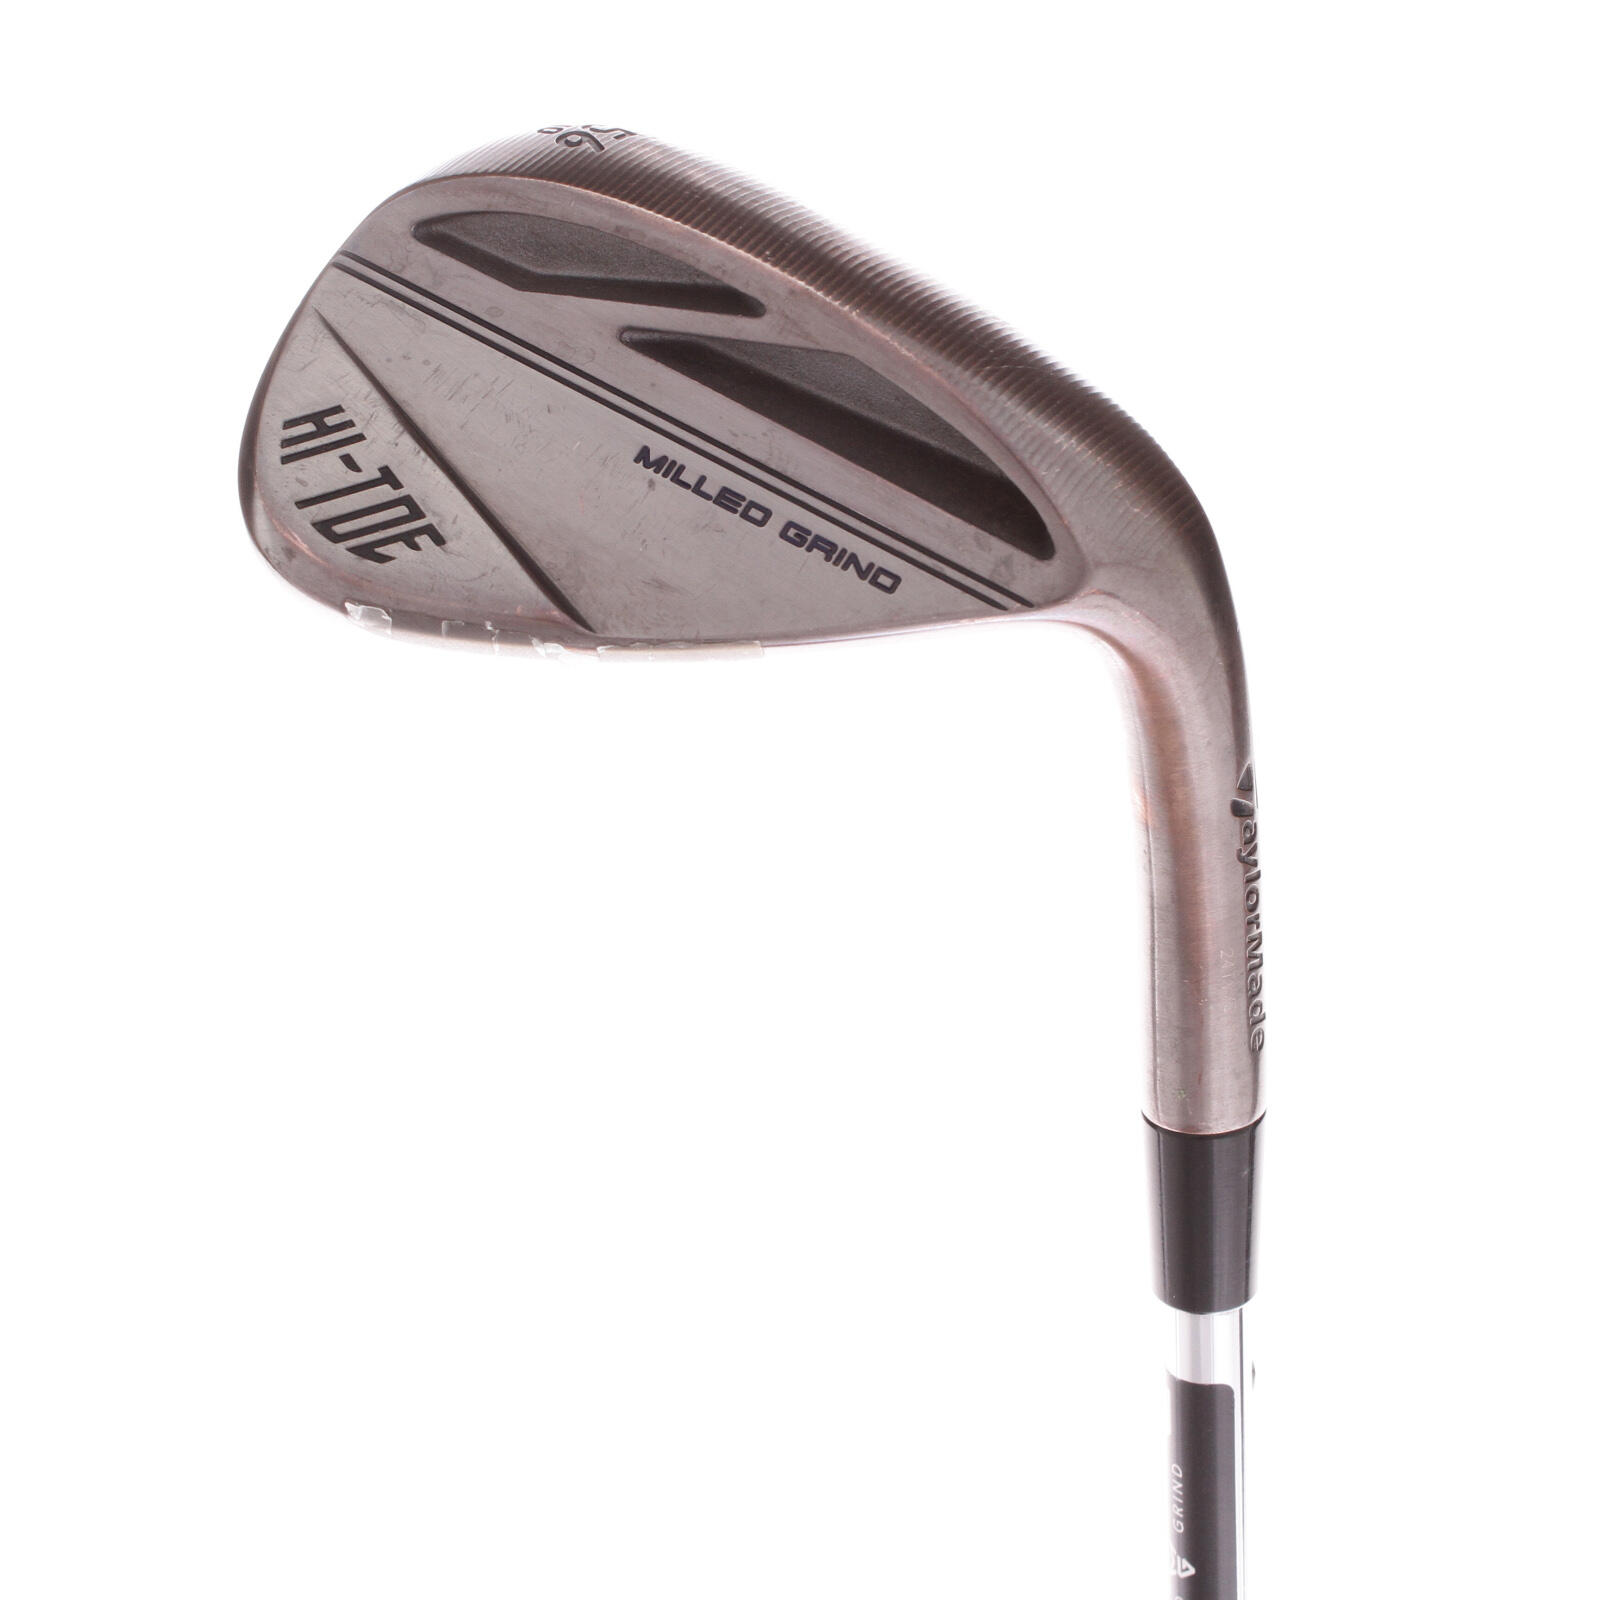 USED - Sand Wedge TaylorMade Milled Grind Hi Toe 56 Degree Right Hand - GRADE B 1/6